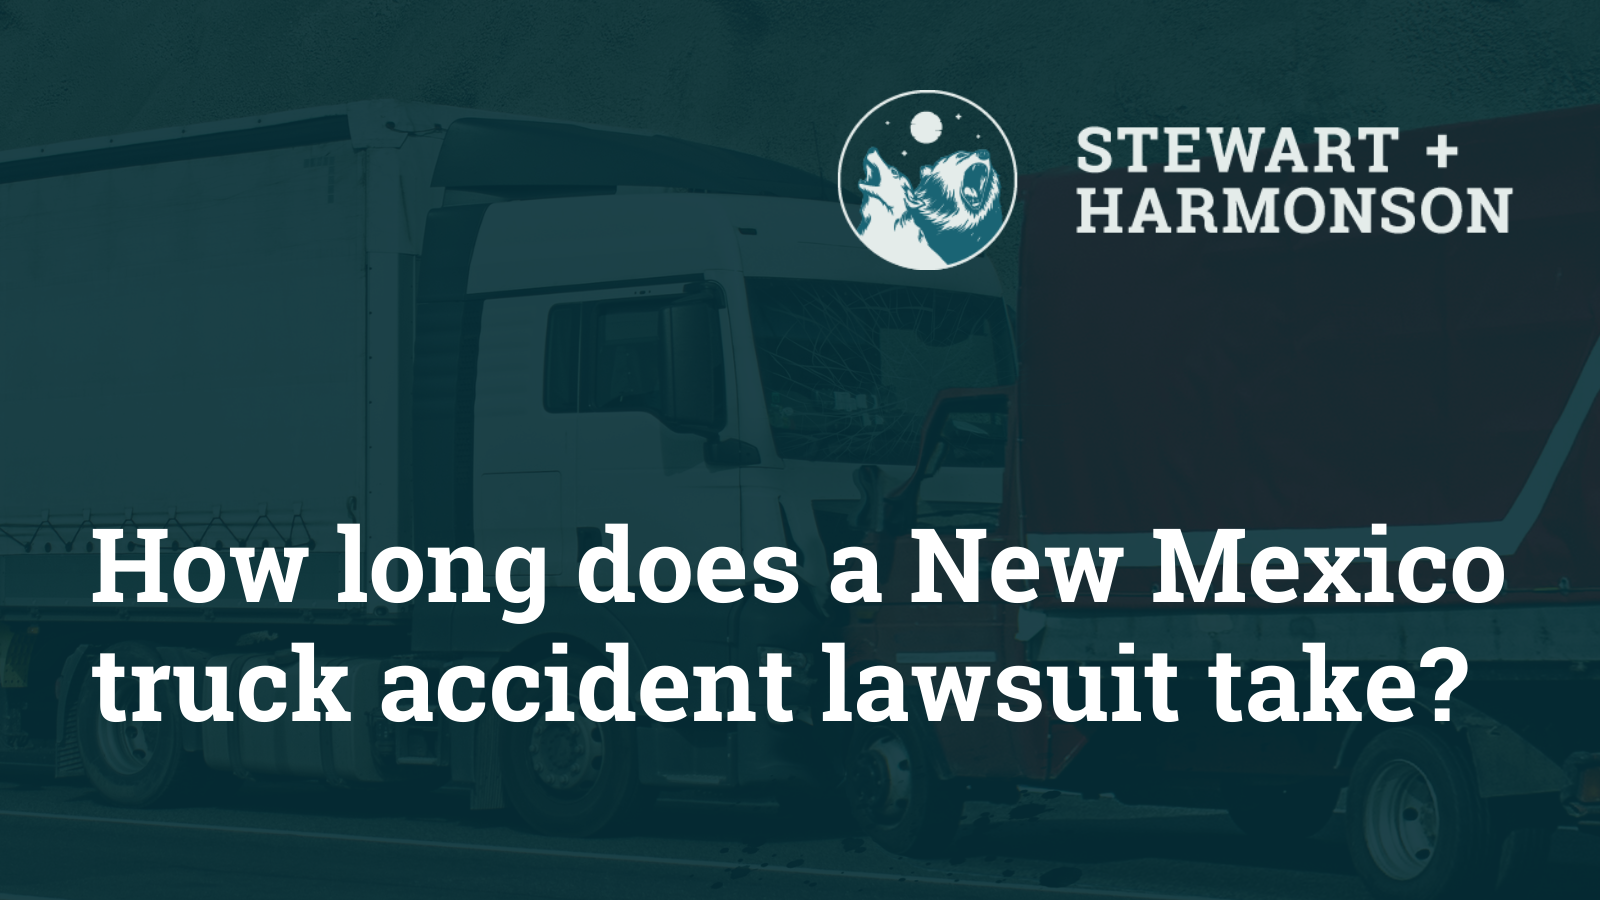 How long does a New Mexico truck accident lawsuit take - Stewart Harmonson Law Firm - New Mexico